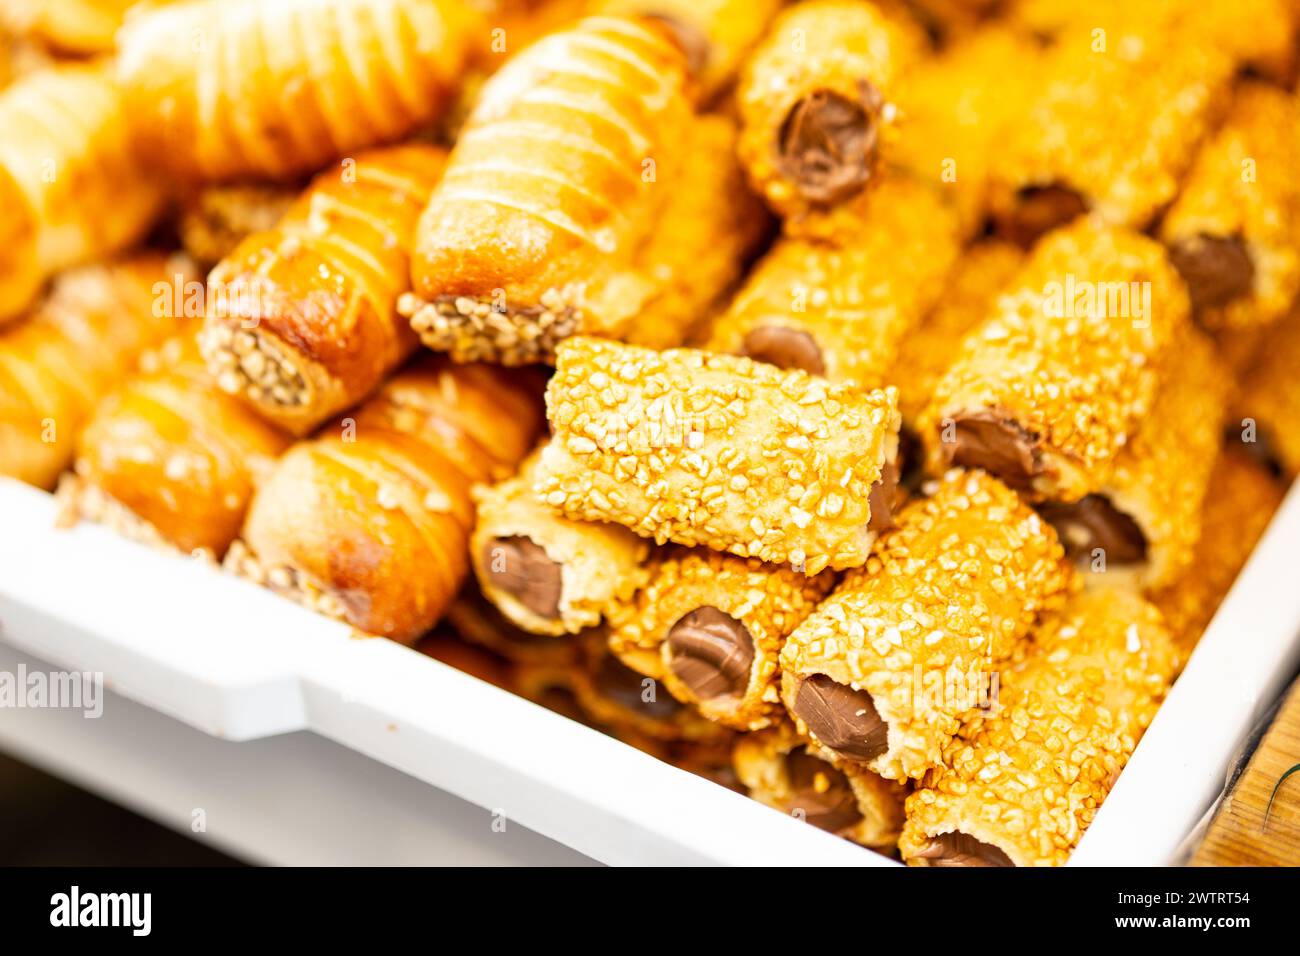 Delicious pastries filled with pistachios and nuts Stock Photo